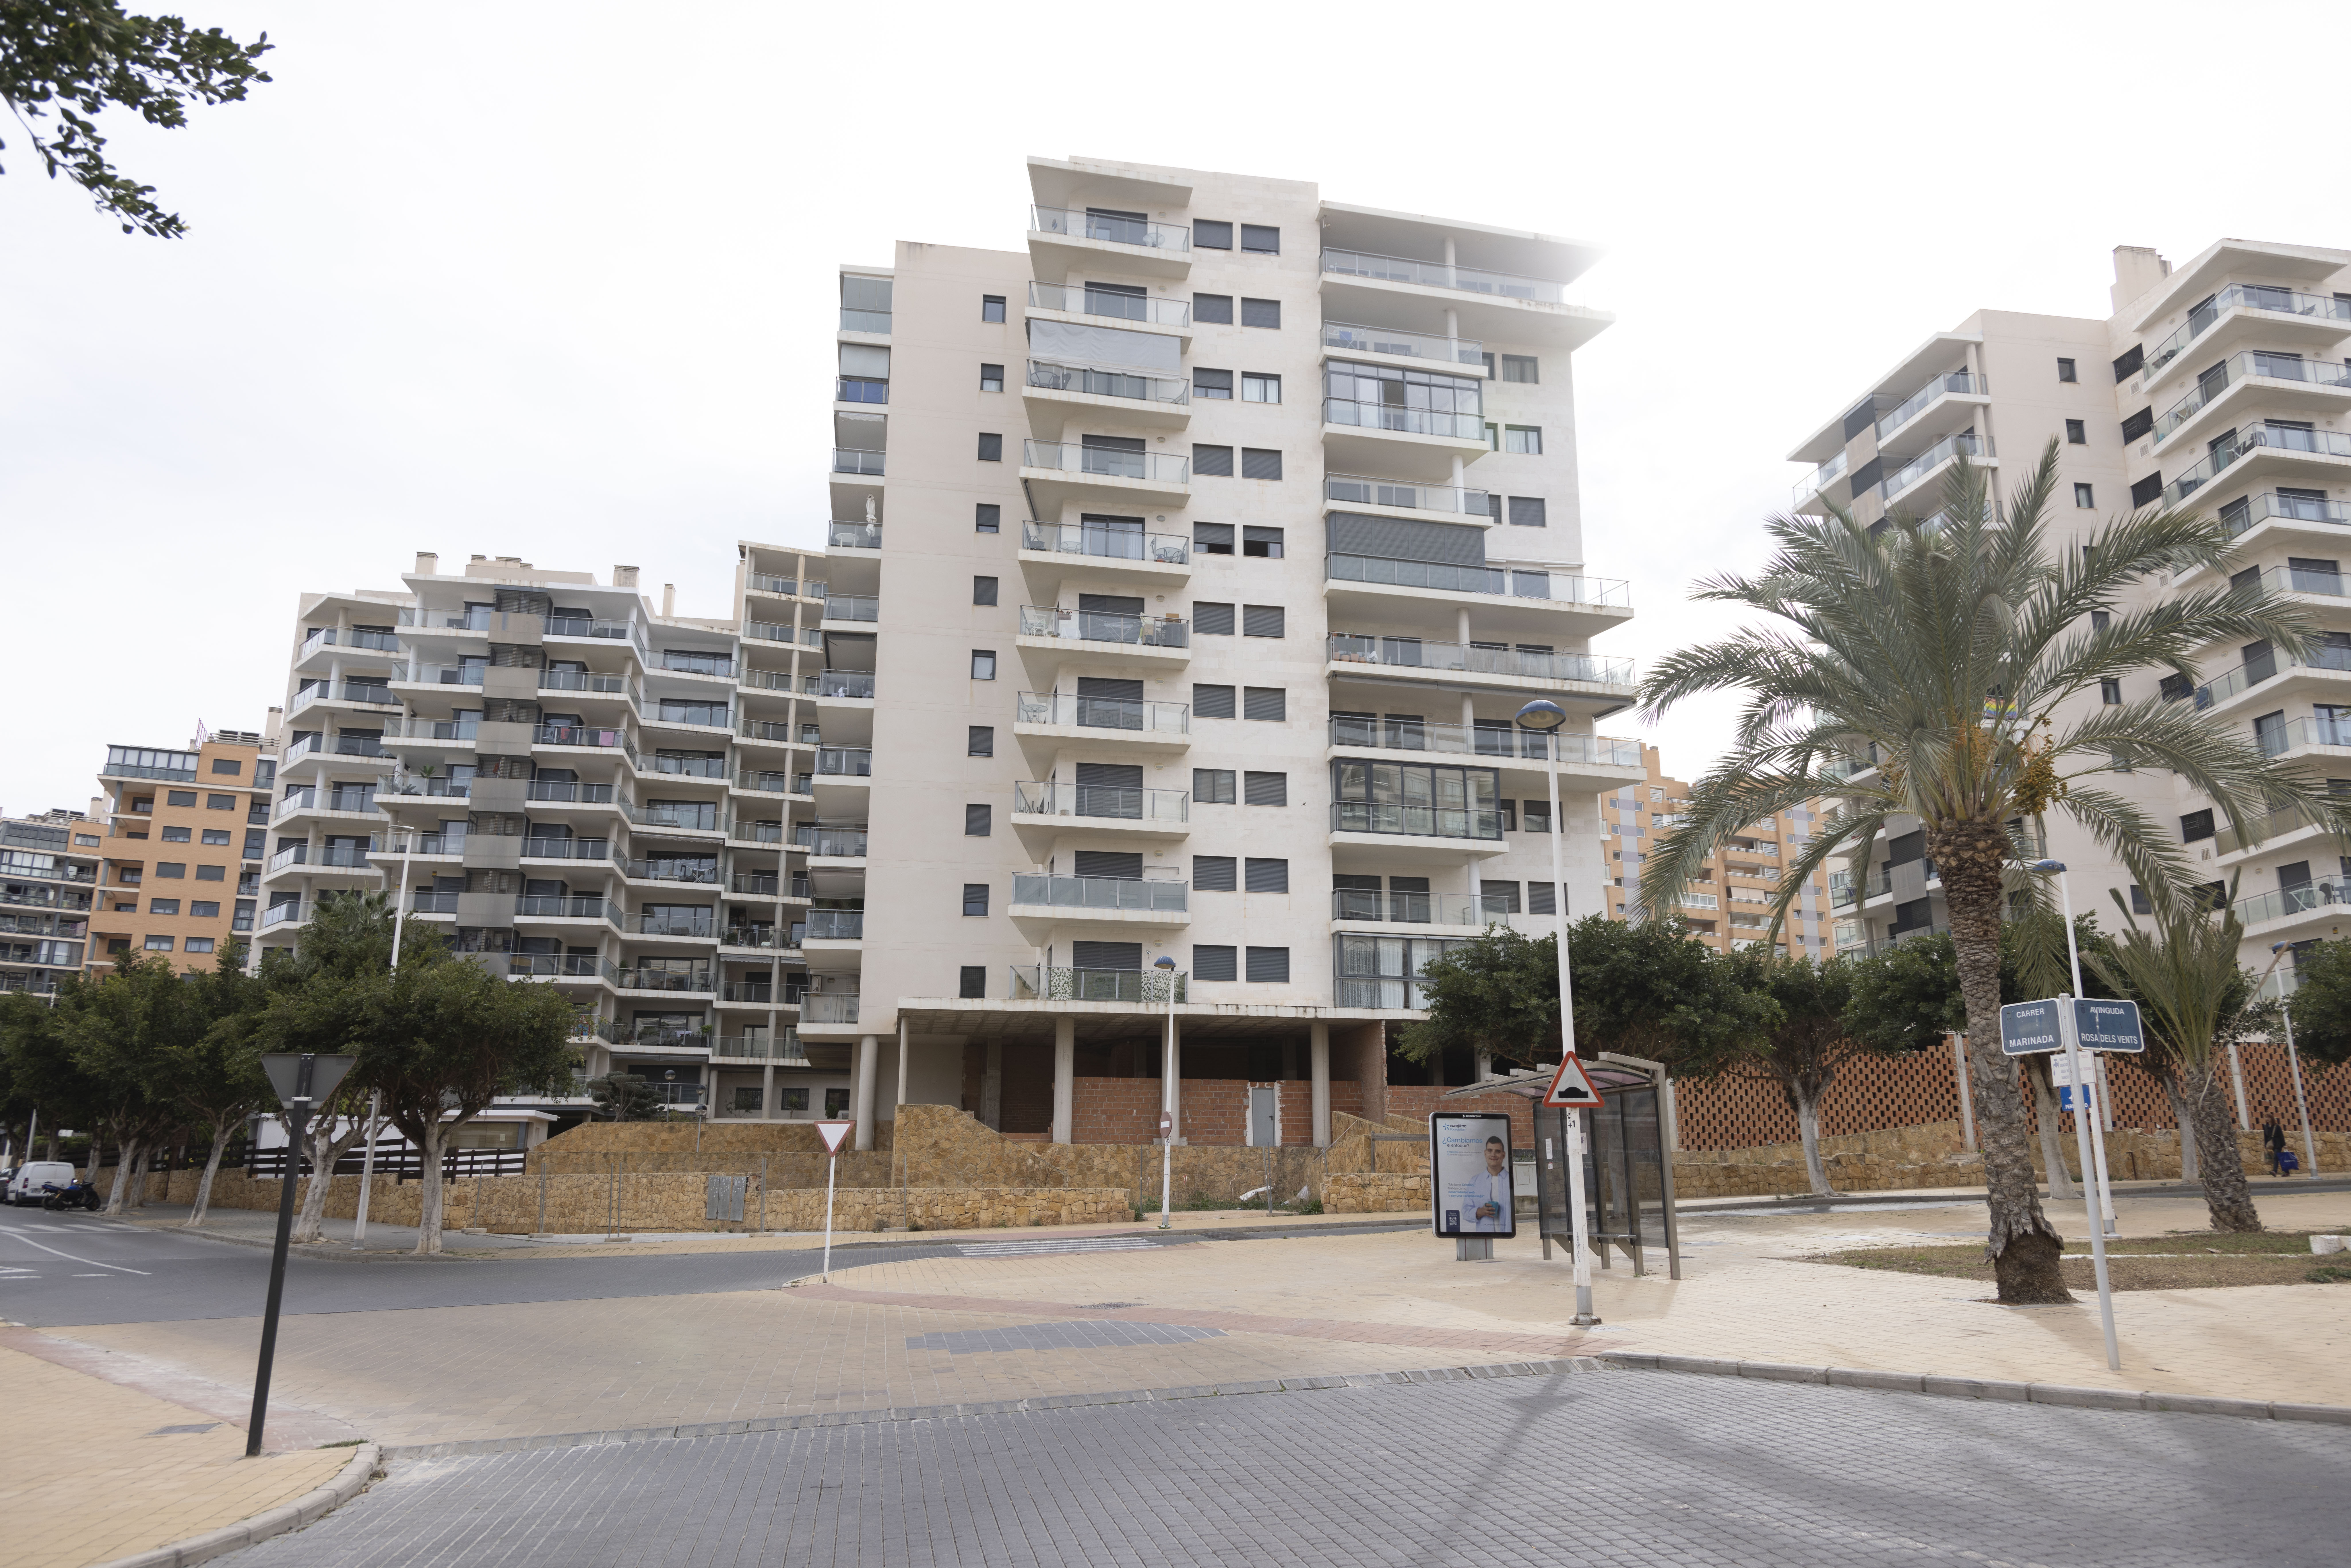 Maxim lived at this apartment building in the residential area of La Cala de Villajoyosa